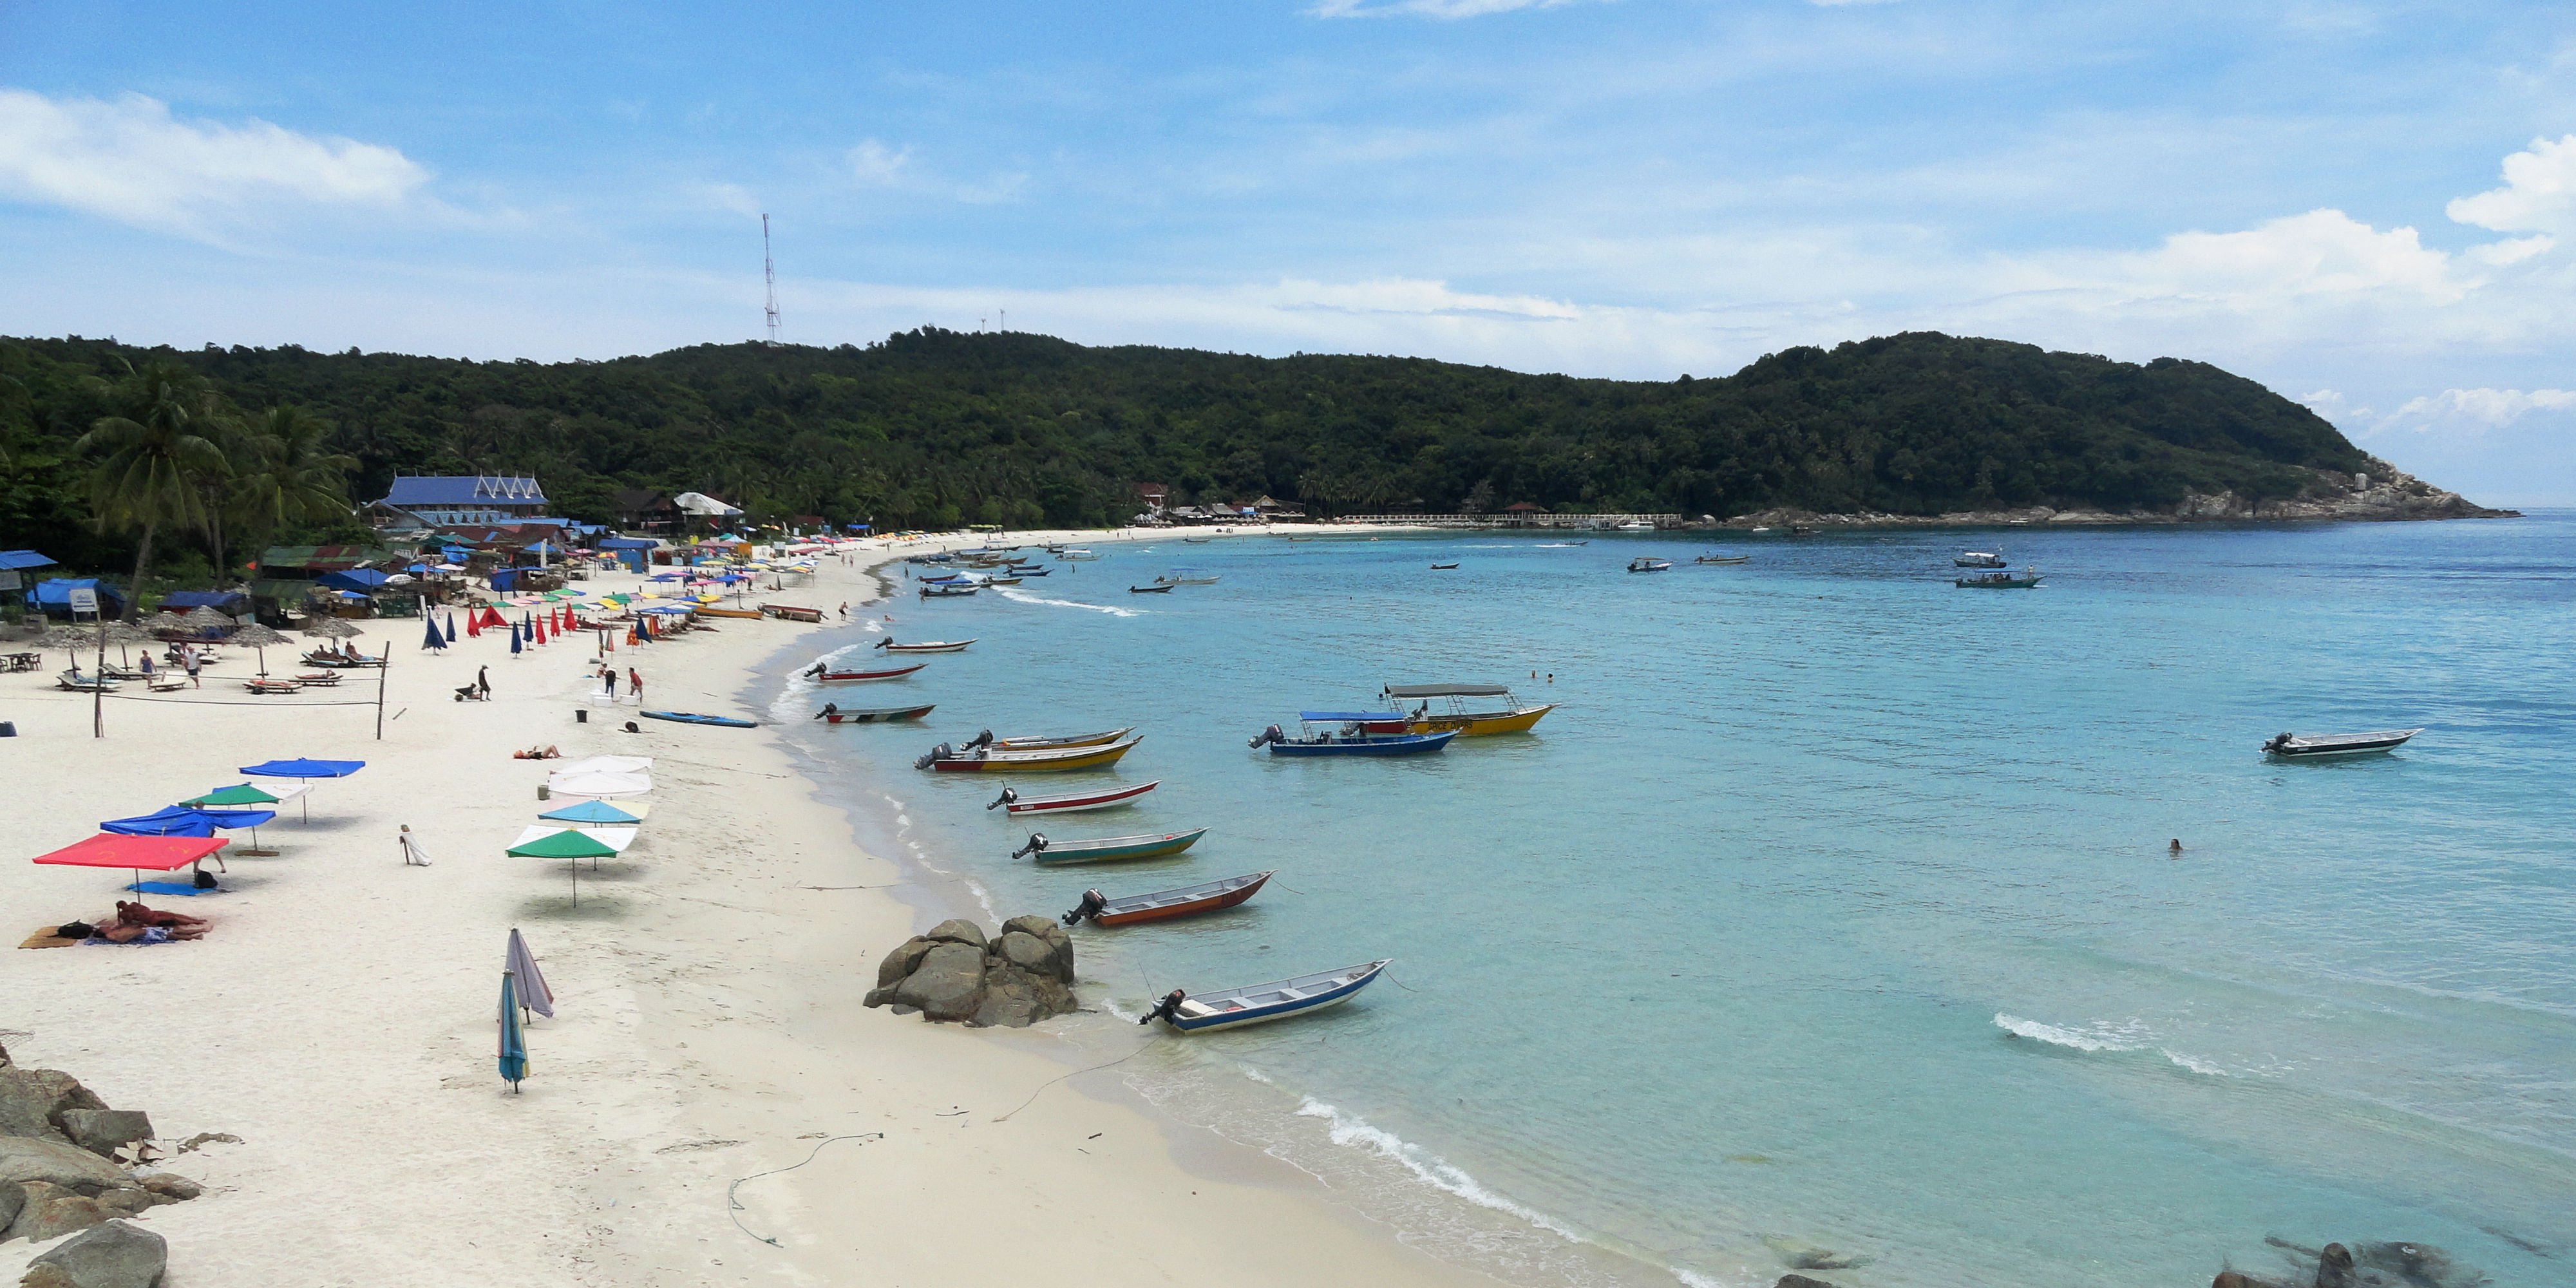 A shot of a beach on the Perhentian Islands shows colourful fishing boats and ebach umbrellas. By promoting sustainable tourism, scenes like this will remain untarnished.